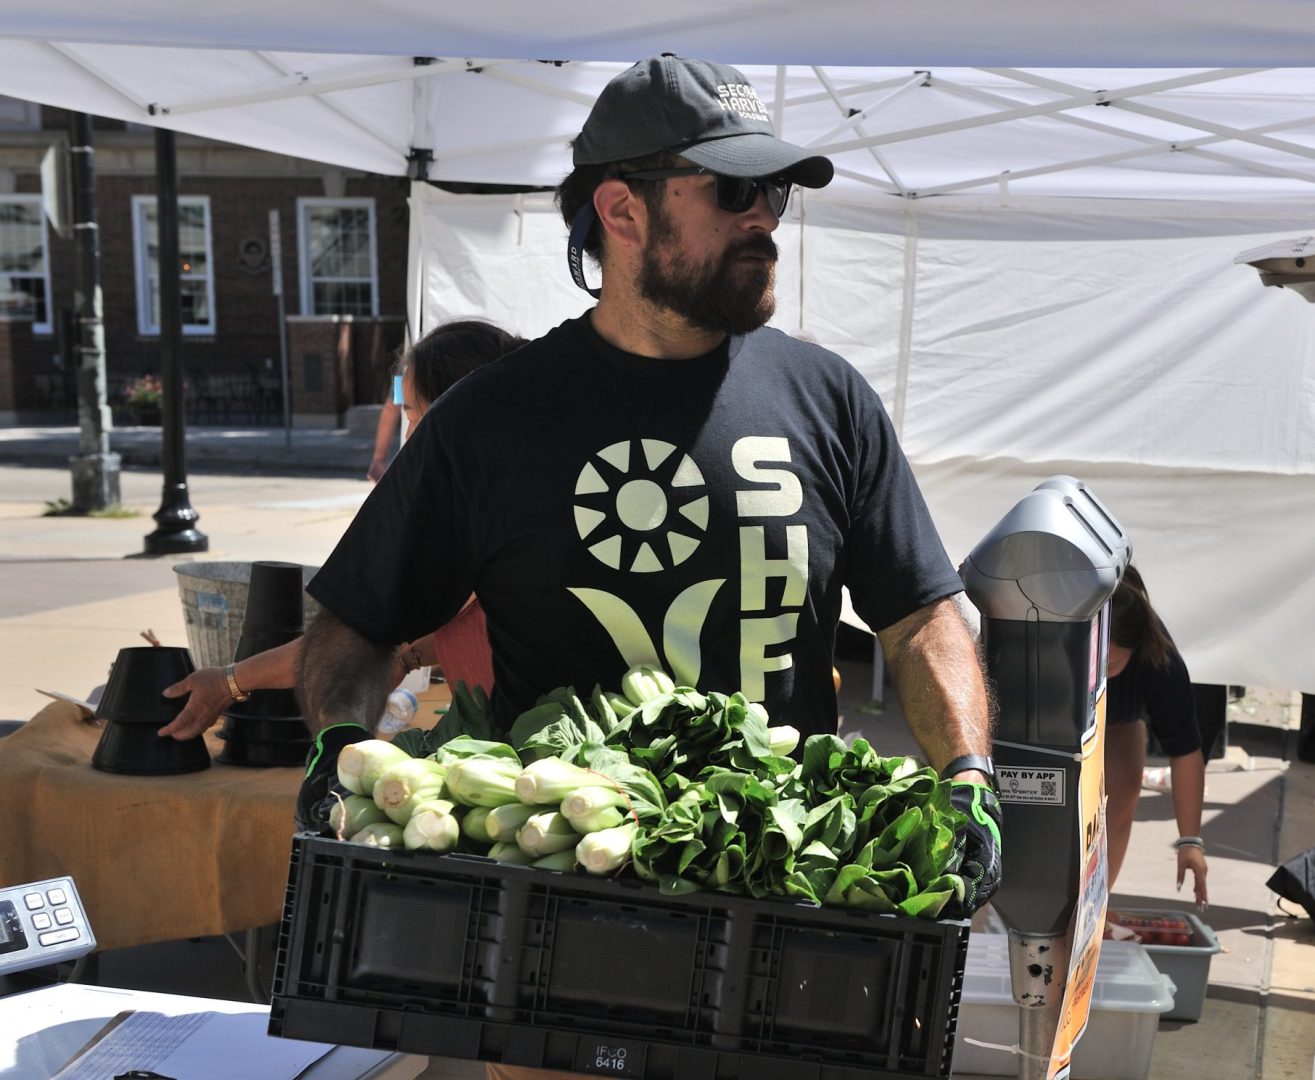 Purchasing produce at Dane County Farmers Market